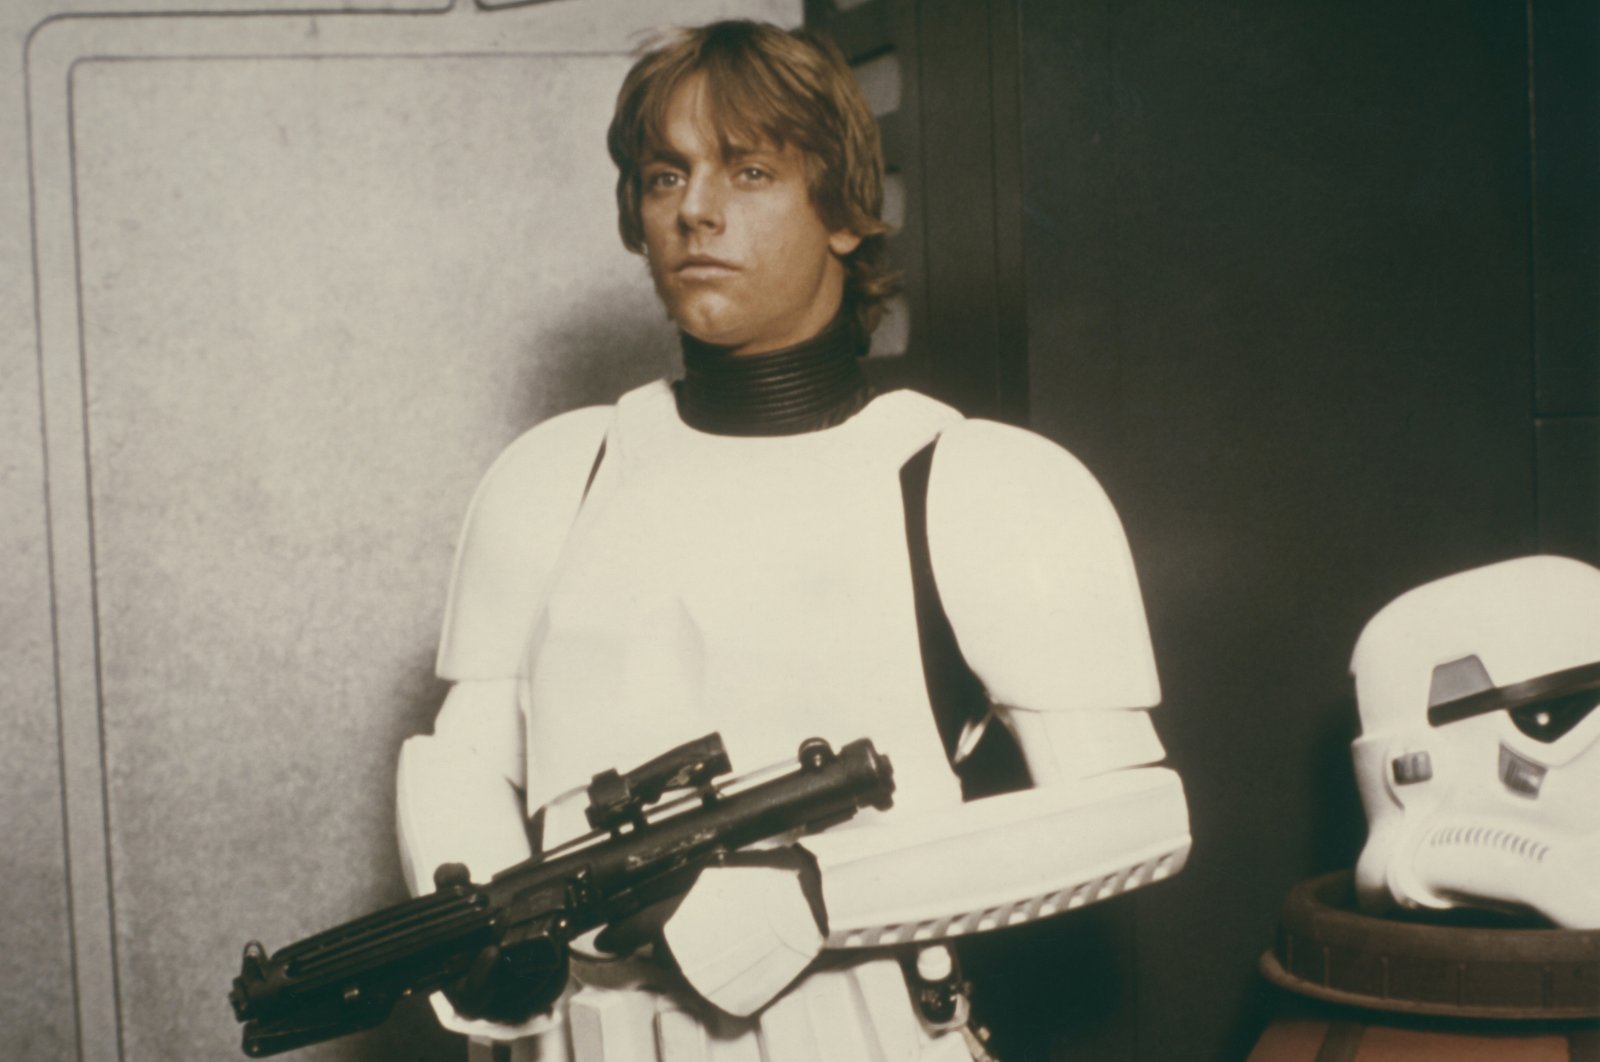 Mark Hamill as Luke Skywalker disguised as a stormtrooper in a scene from &quot;Star Wars Episode IV: A New Hope,&quot; 1977. (Getty Images Photo)